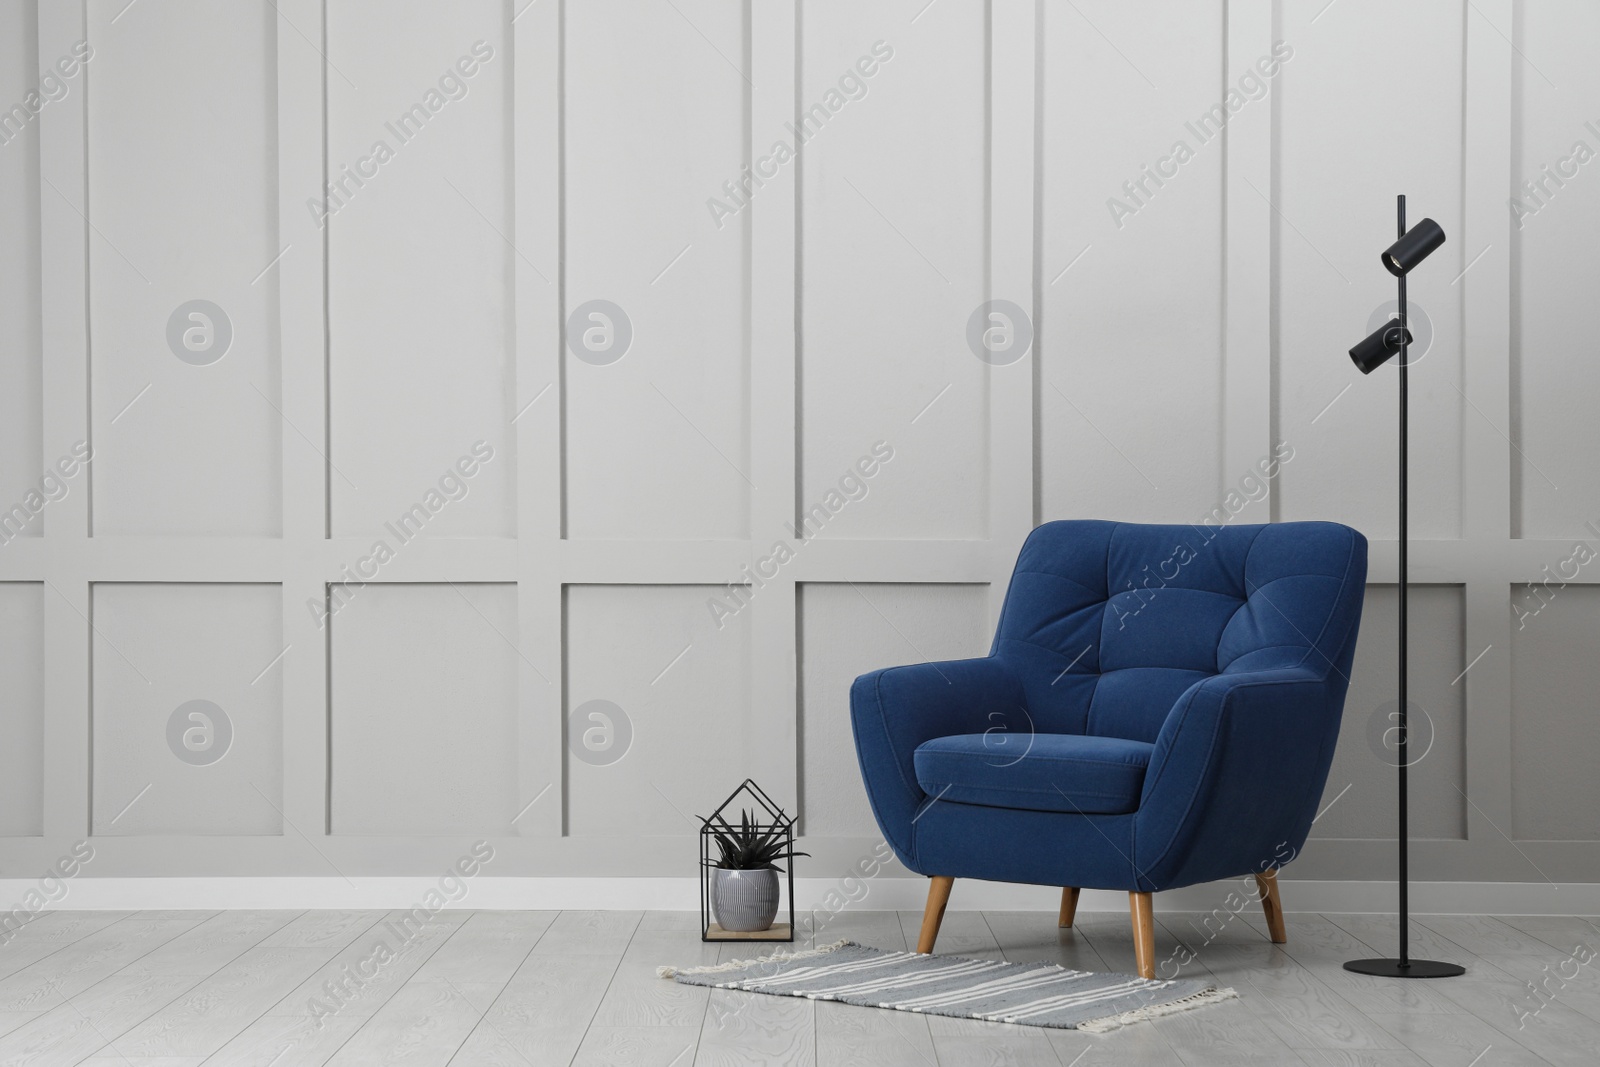 Photo of Stylish interior with armchair and floor lamp near white wall in room, space for text